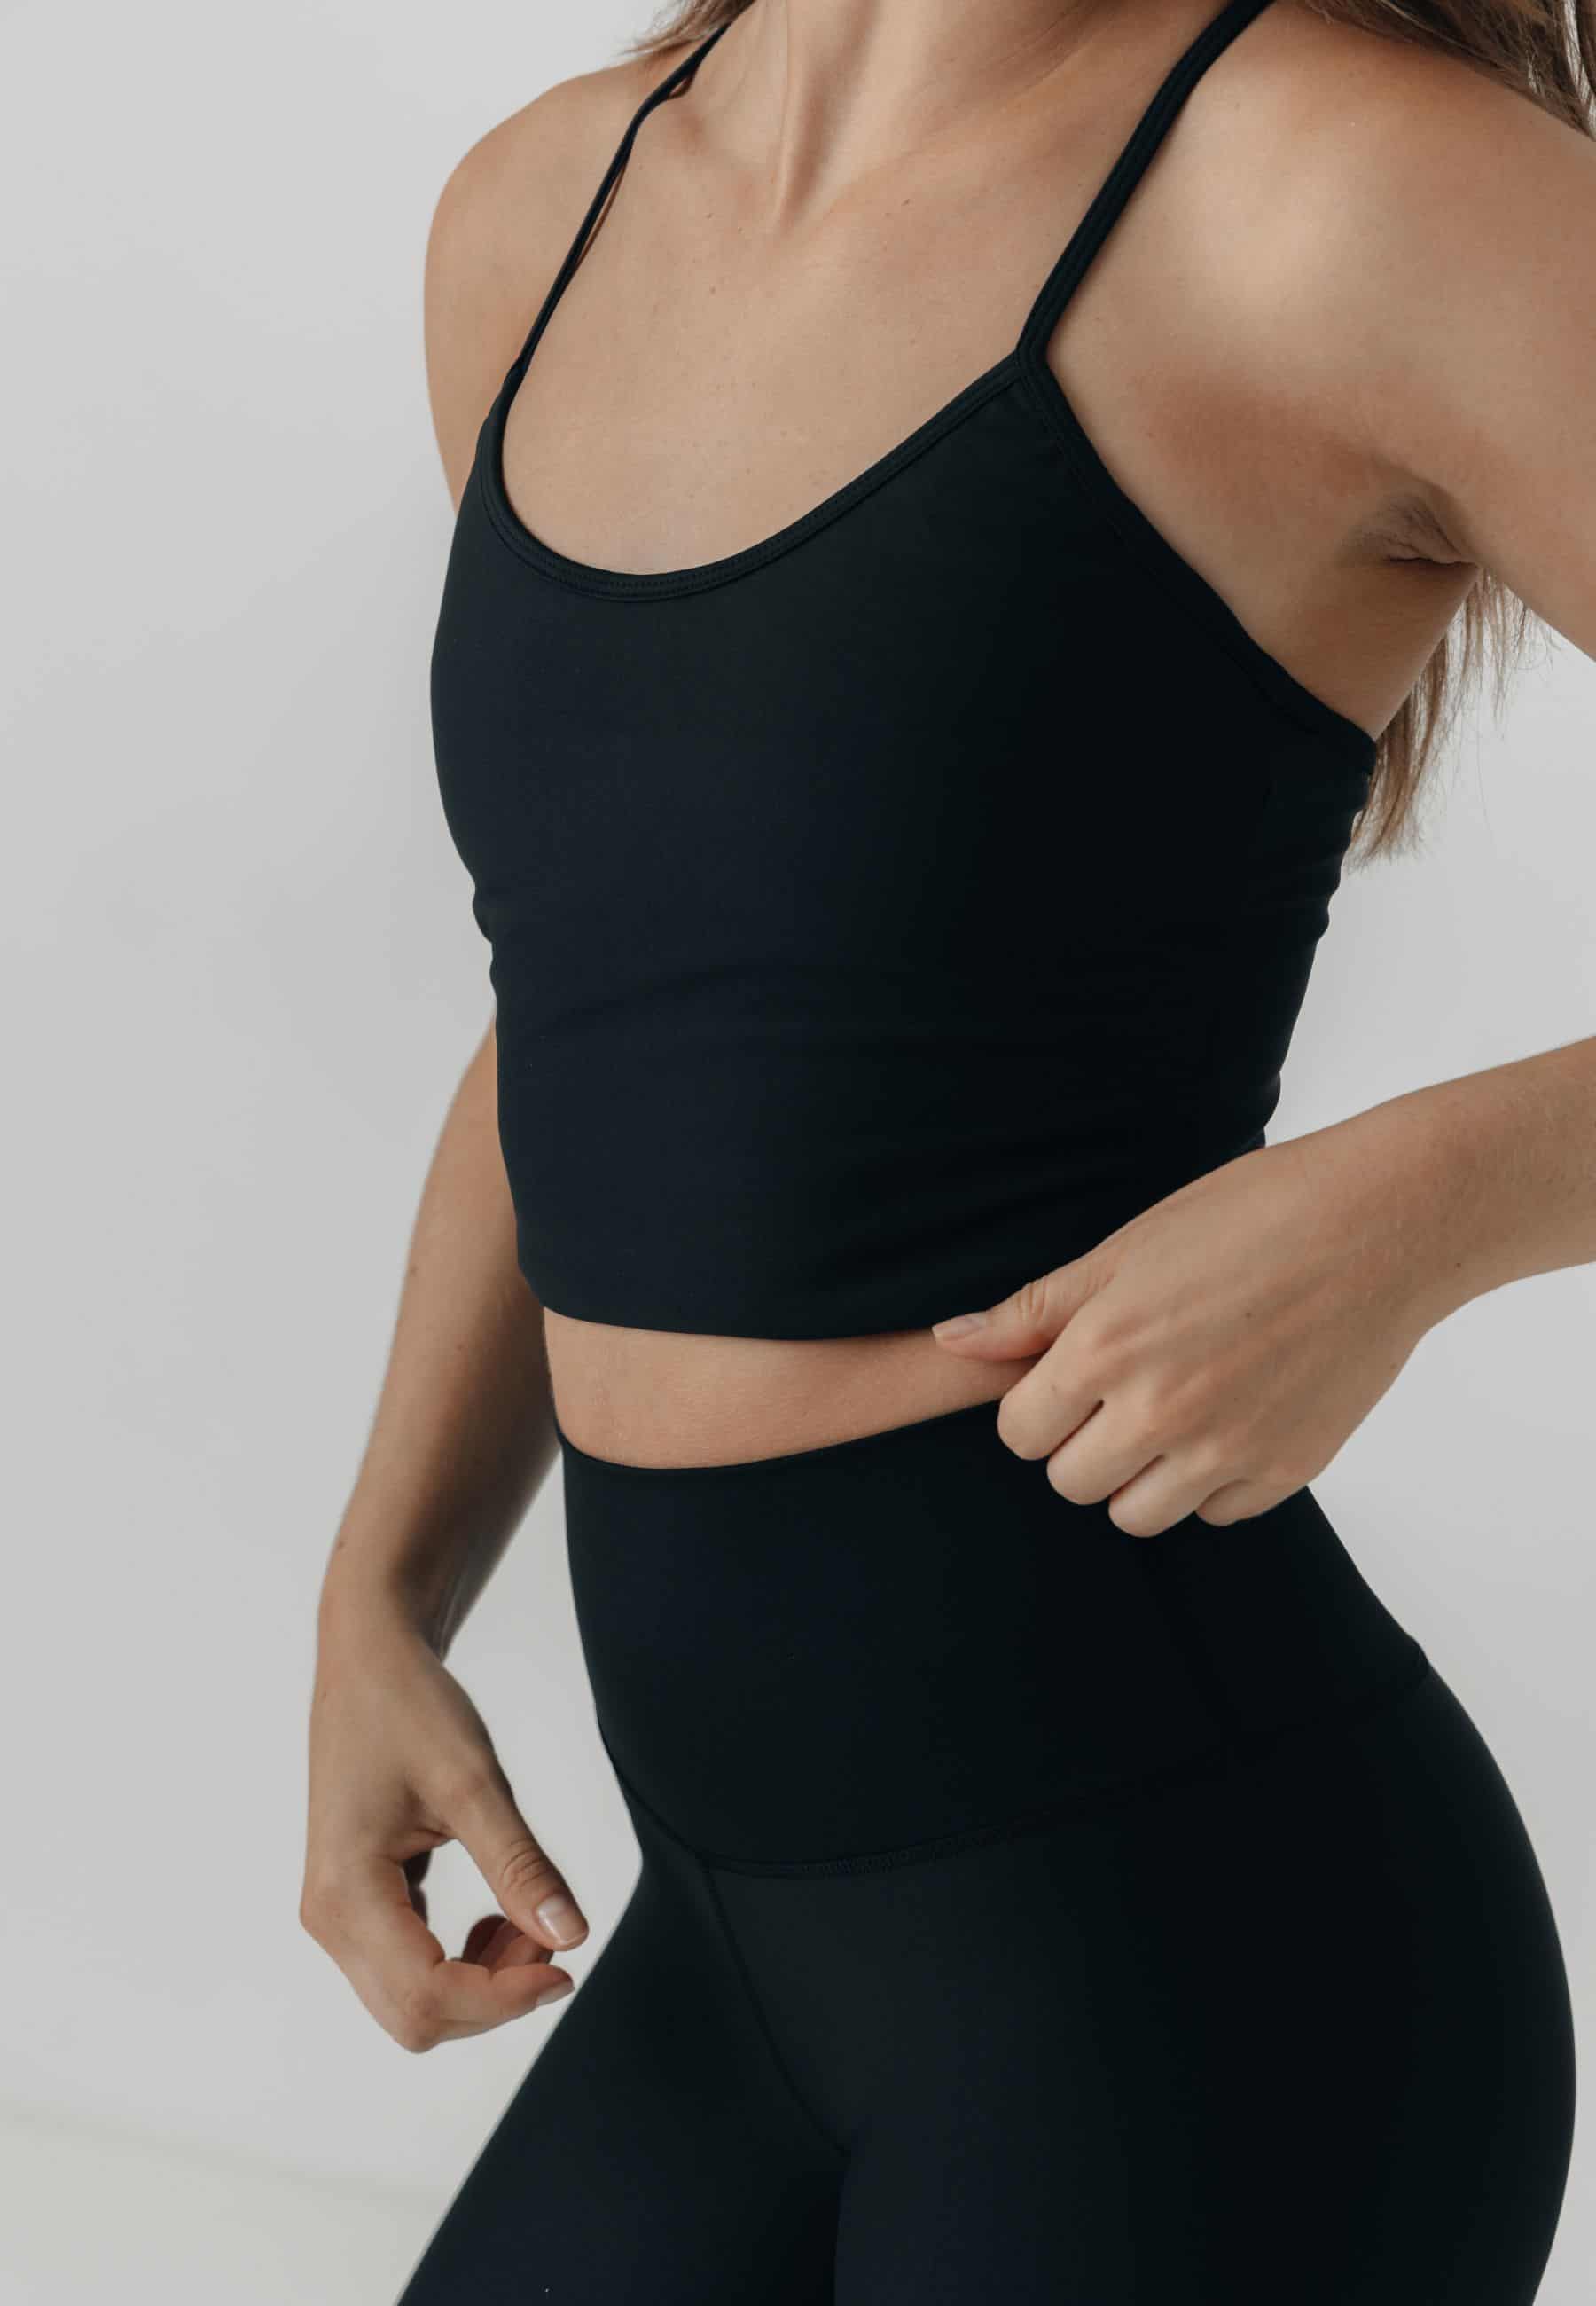 Sisterly Tribe - Yoga Singlet Top Black. Light support, Thin shoulder strap, minimalistic design, Buttery Soft and light, matte fabric.